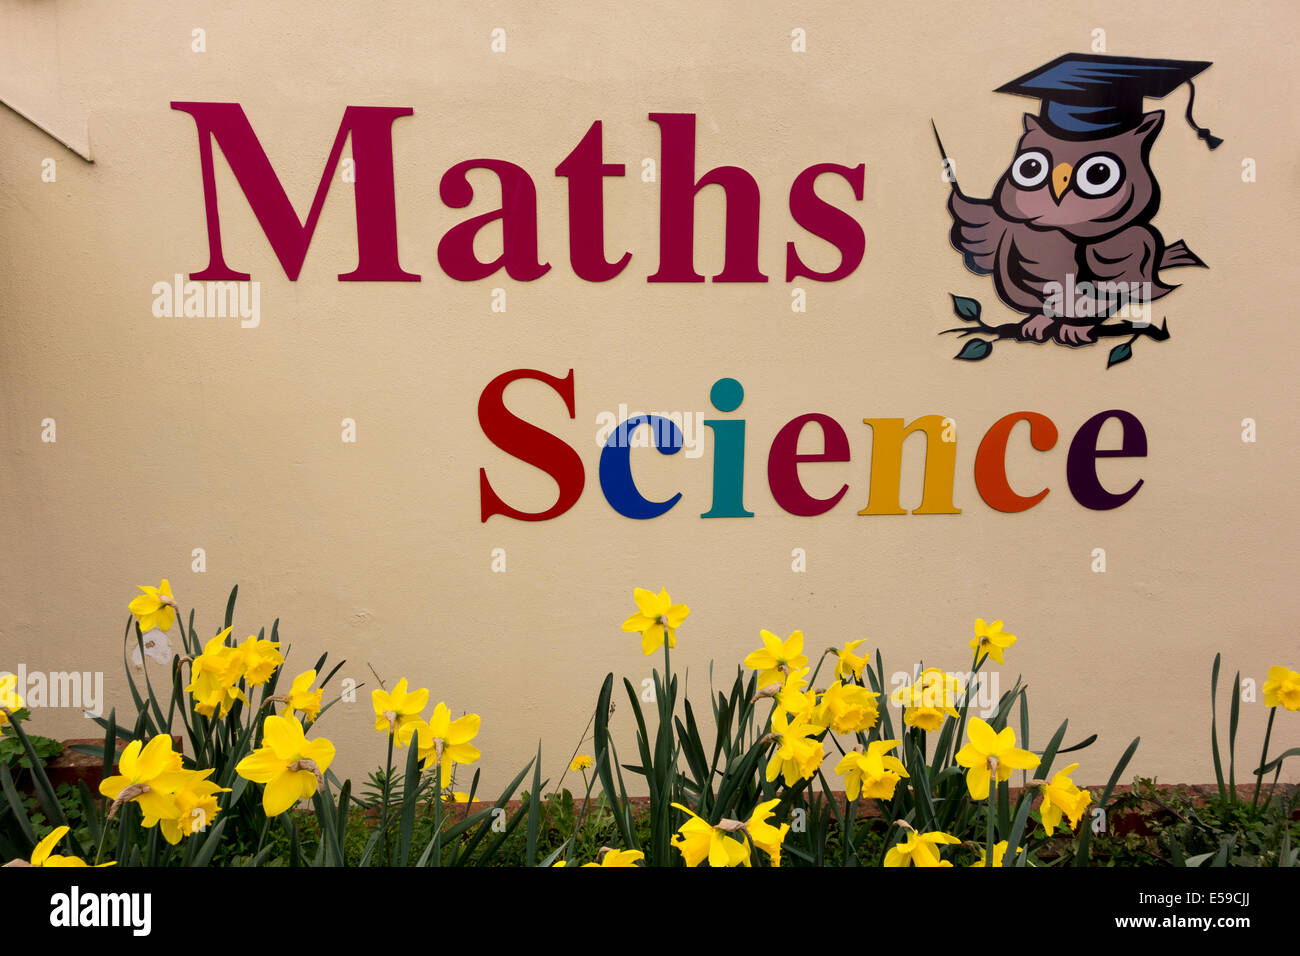 Maths and Science private tutoring sign, UK Stock Photo